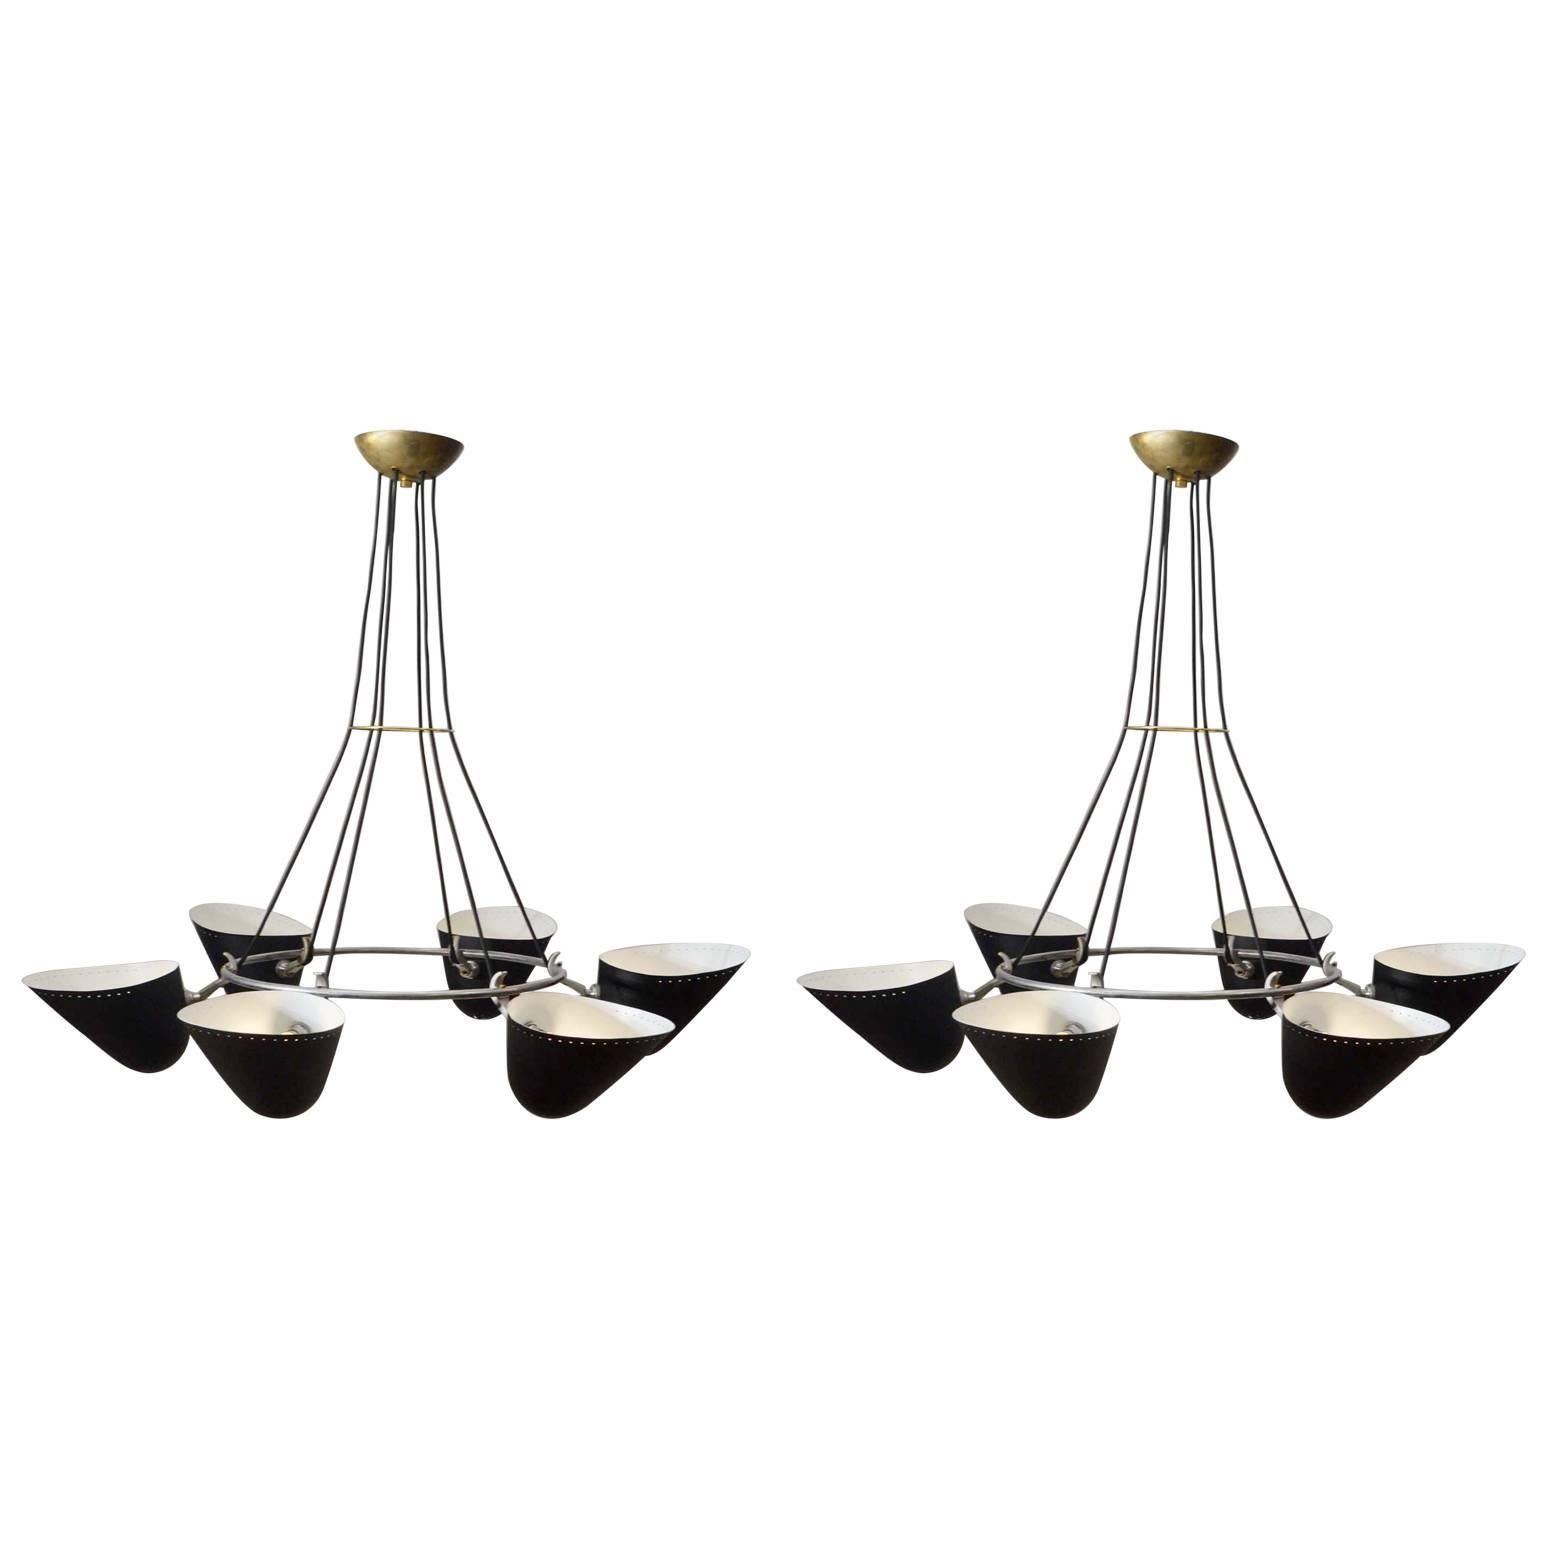 One of a pair of original Mid-Century Modern six-shades black metal chandelier with perforated shades. They are attached to a chrome-plated ring with chrome-plated machine joints. A brass ring holds the cords together and leads to a brass ceiling